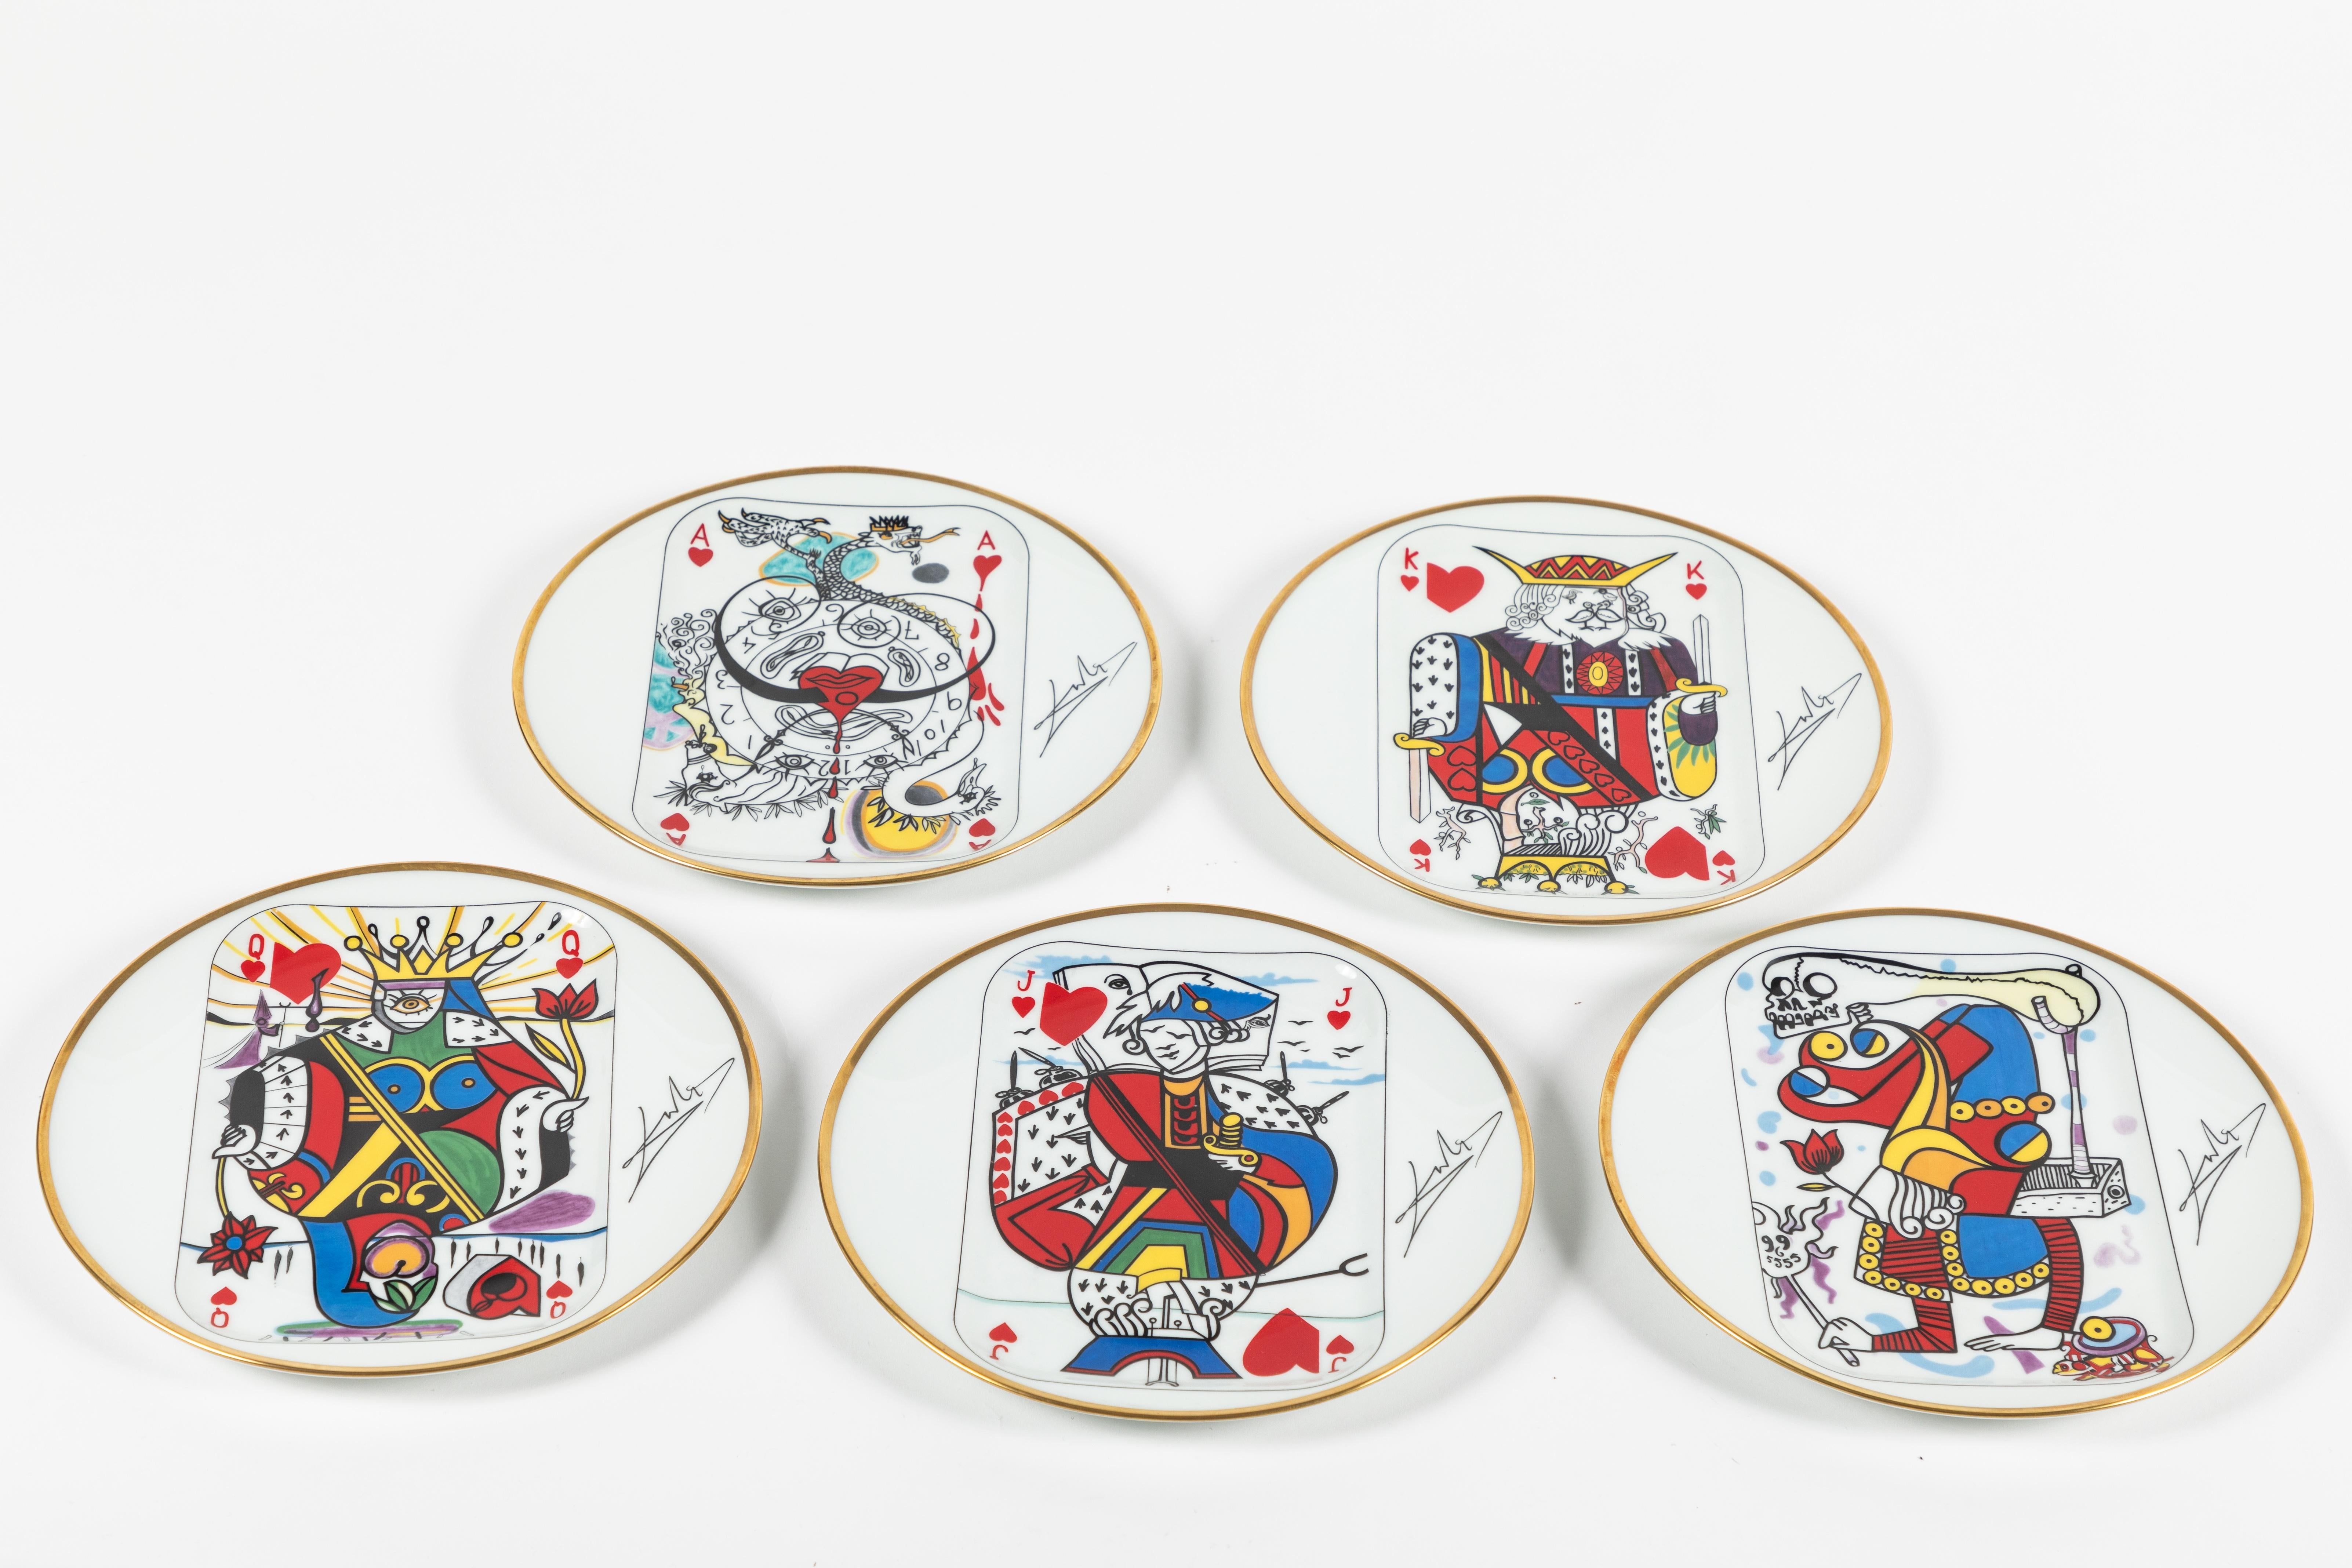 Great full set of “Face Card” plates manufactured in Limoges France by Puiforcat and Decoration by Salvador Dali. The set includes the King, Queen, Jack, Ace, and Joker. From an edition of 2000 plates all plates are numbered. As seen in the listing